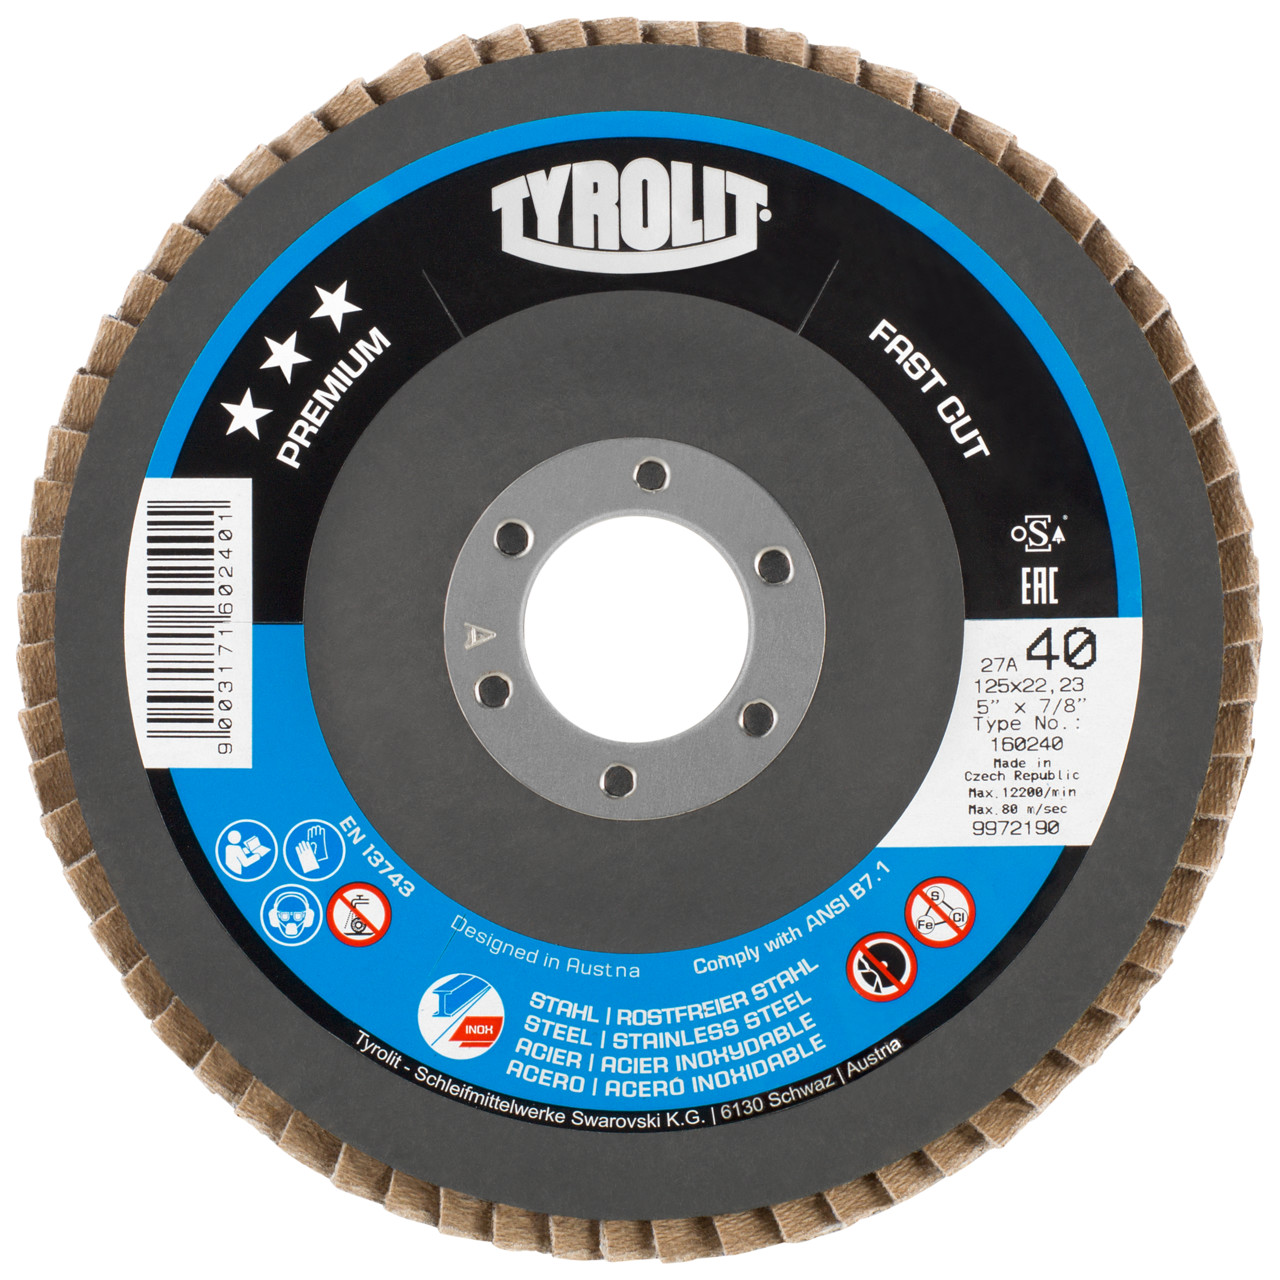 Tyrolit Serrated lock washer DxH 125x22.2 FASTCUT for steel &amp; stainless steel, P40, shape: 28A - straight version (glass fibre carrier body version), Art. 160254